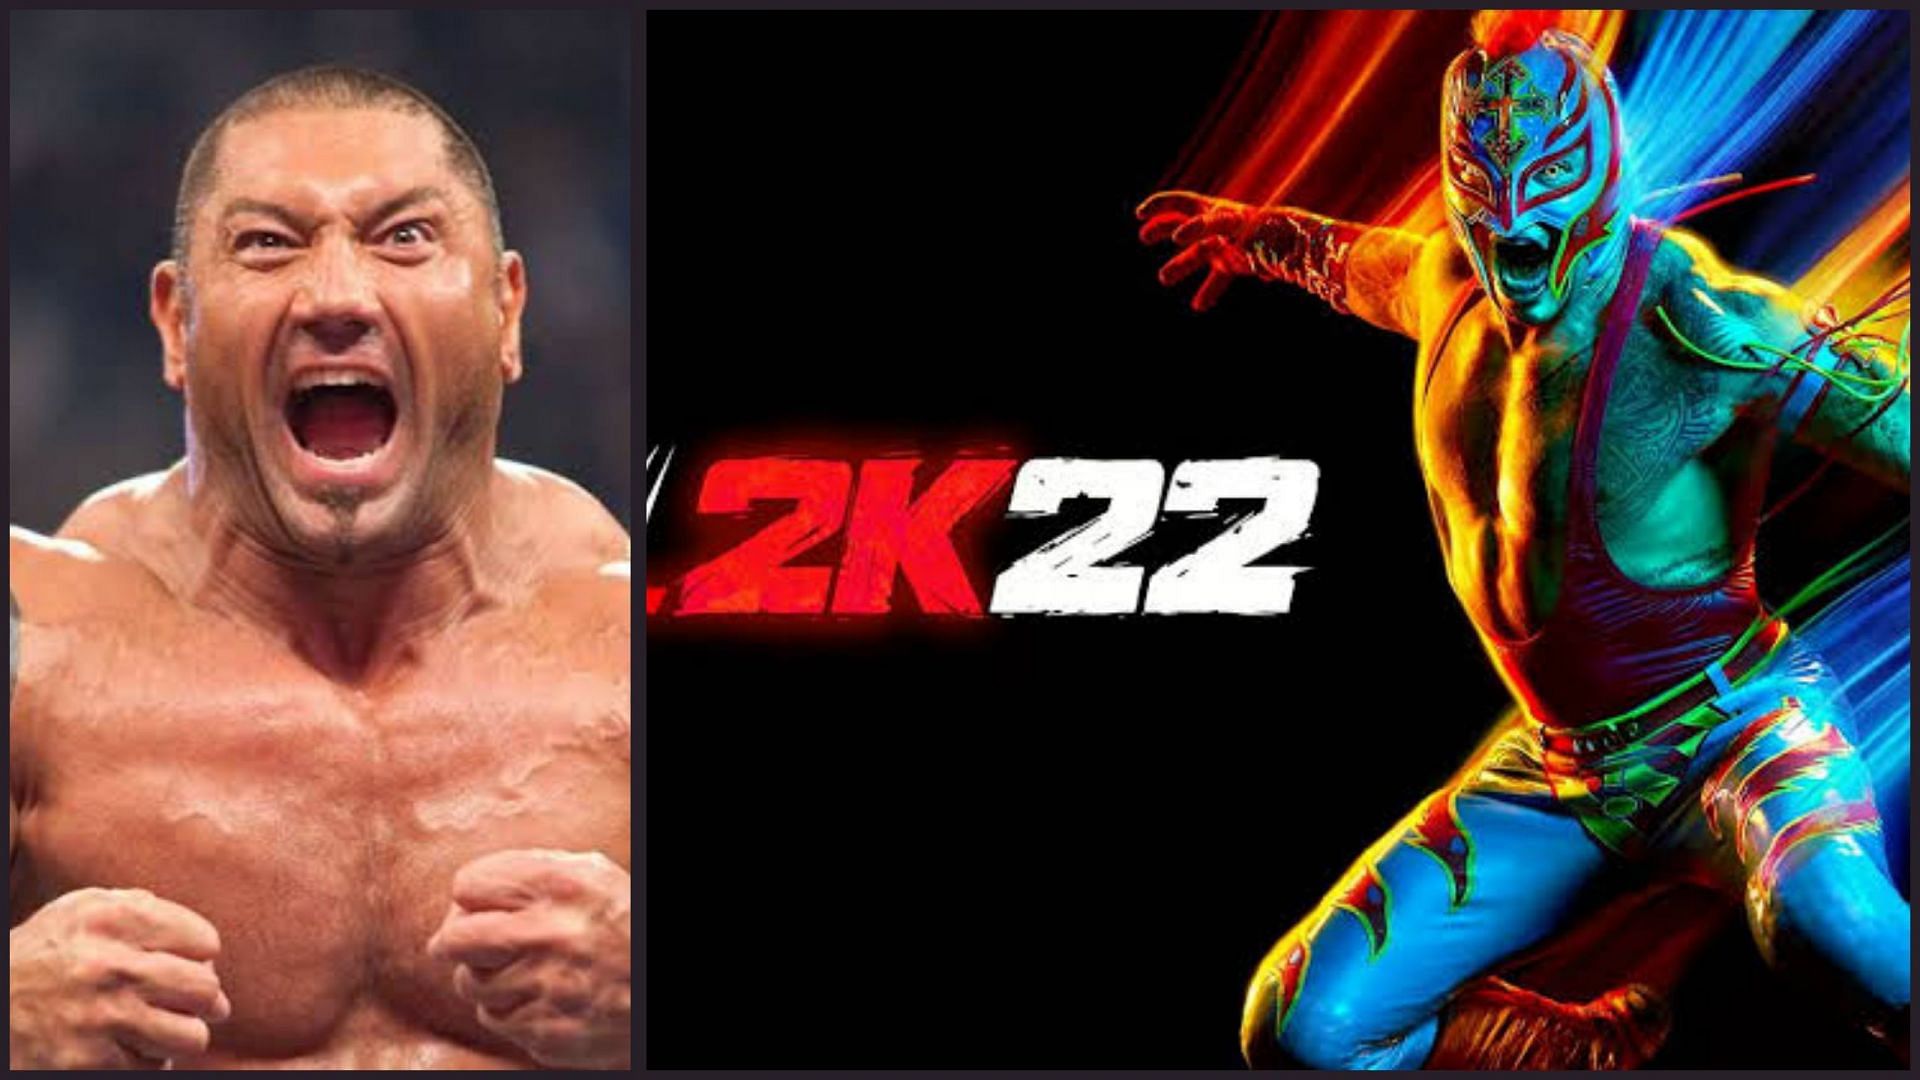 How to unleash the Animal in WWE 2K22?